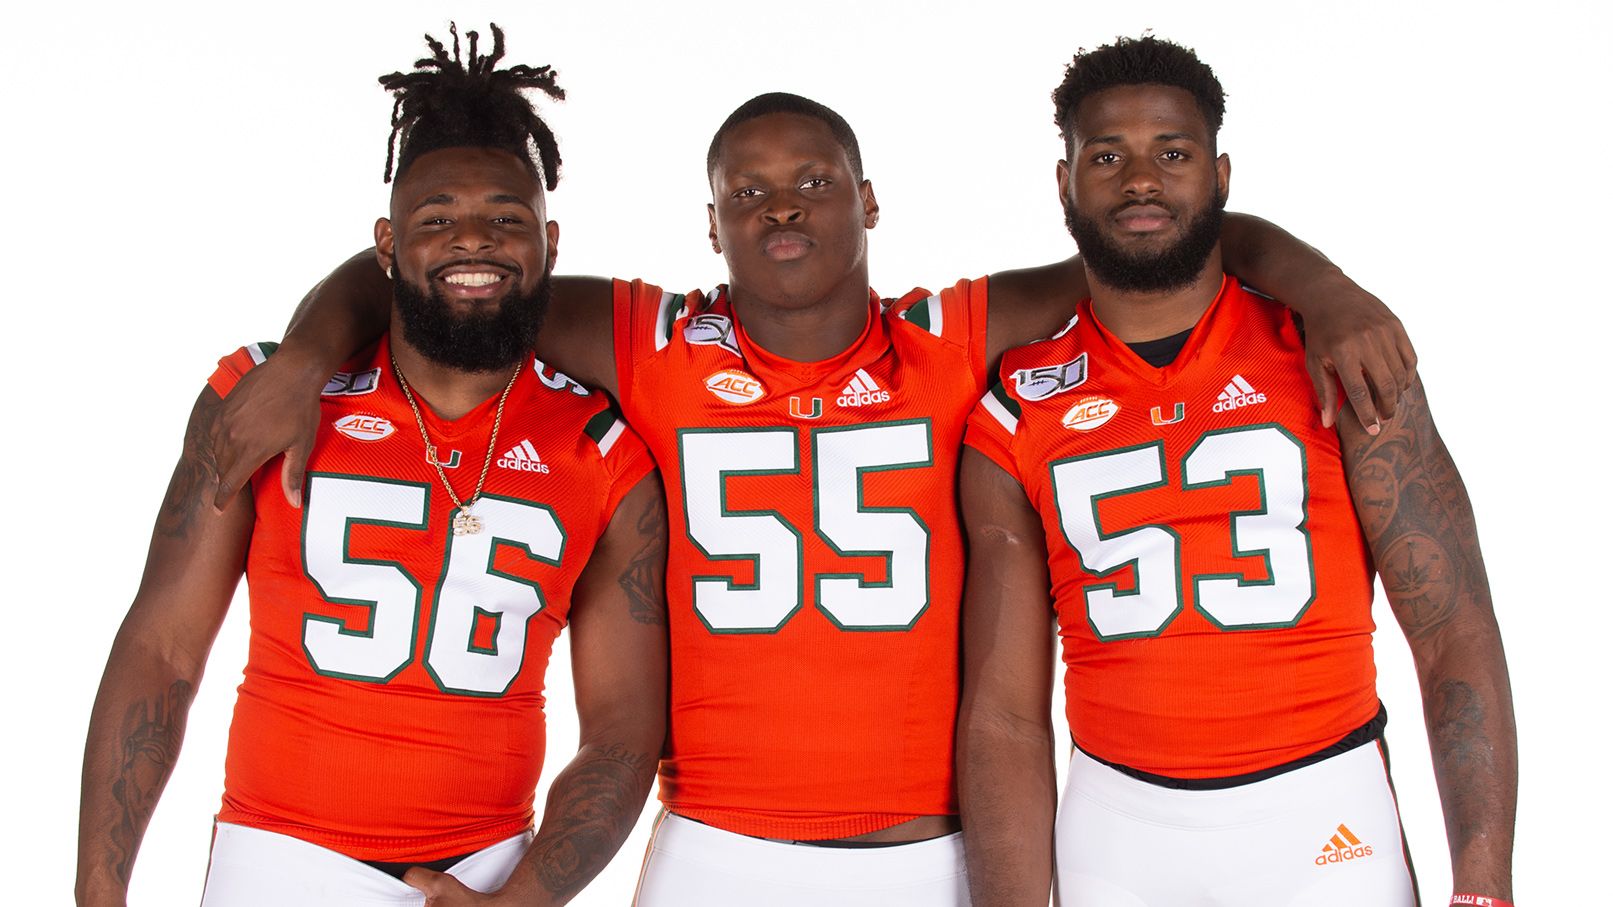 Quarterman, Pinckney and McCloud Ready for 'One Last Ride'